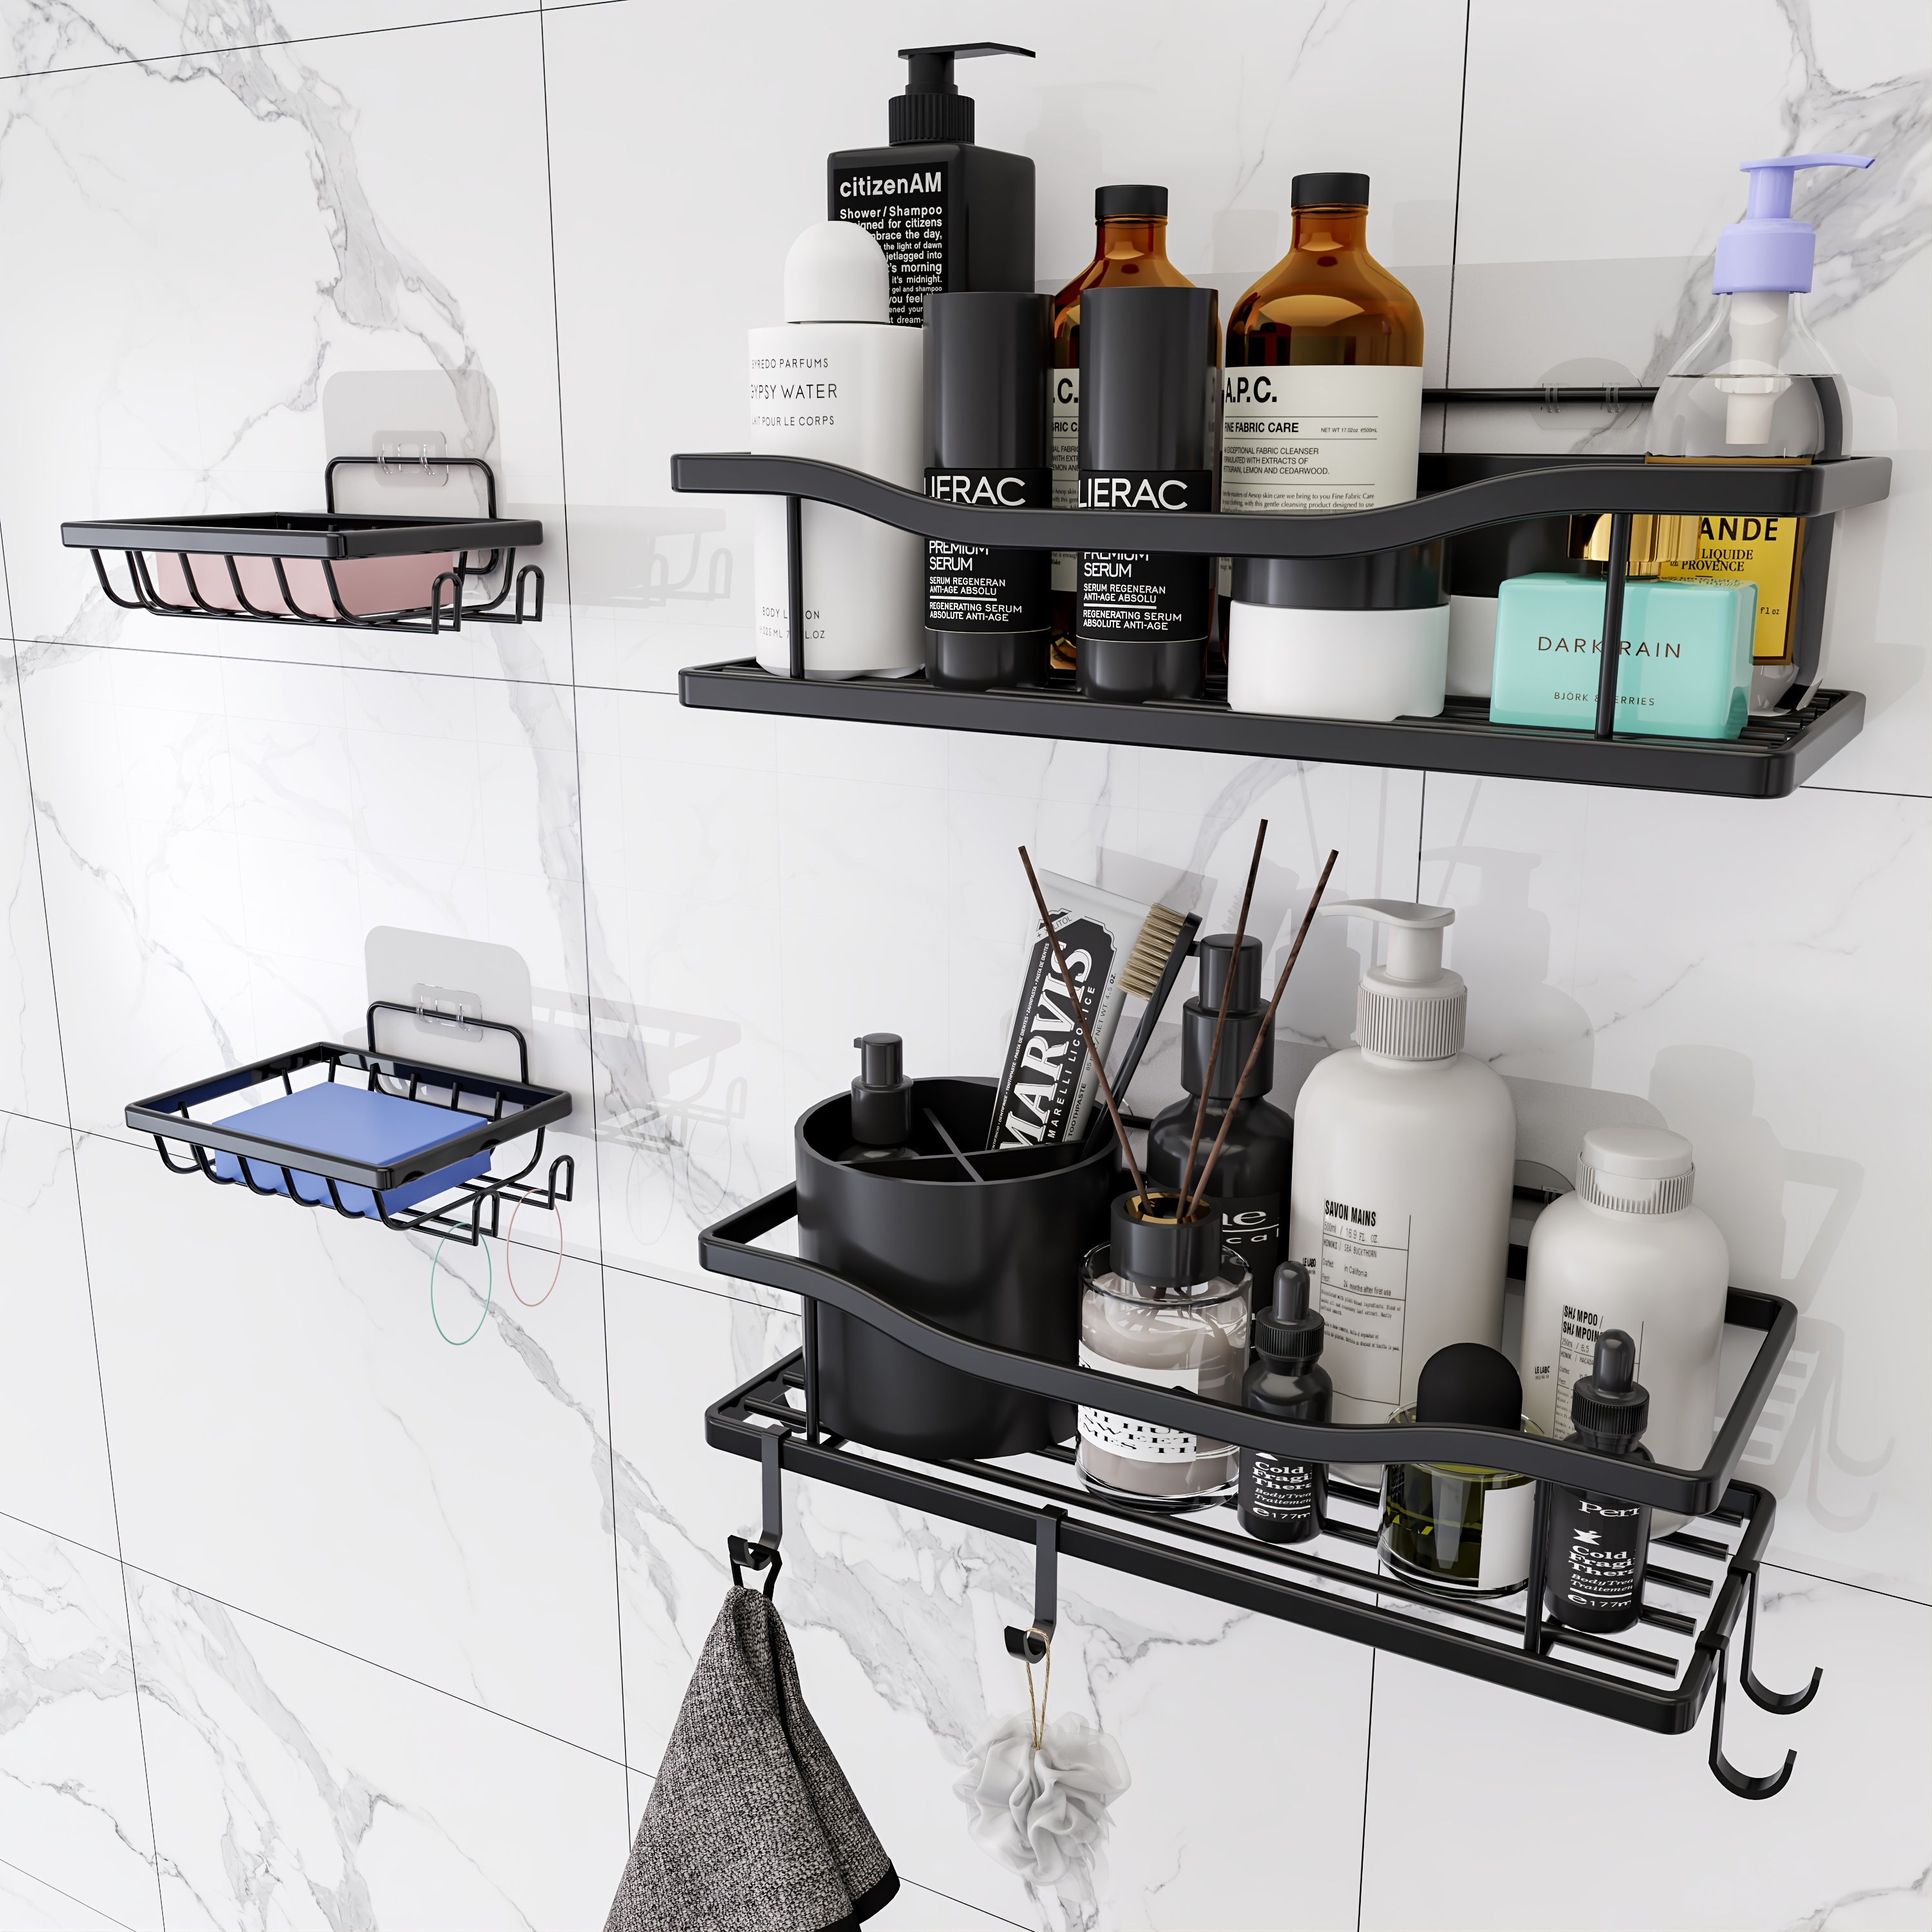 Stainless Steel Shower Caddy With 6 Hooks - Adhesive Mounted Wall